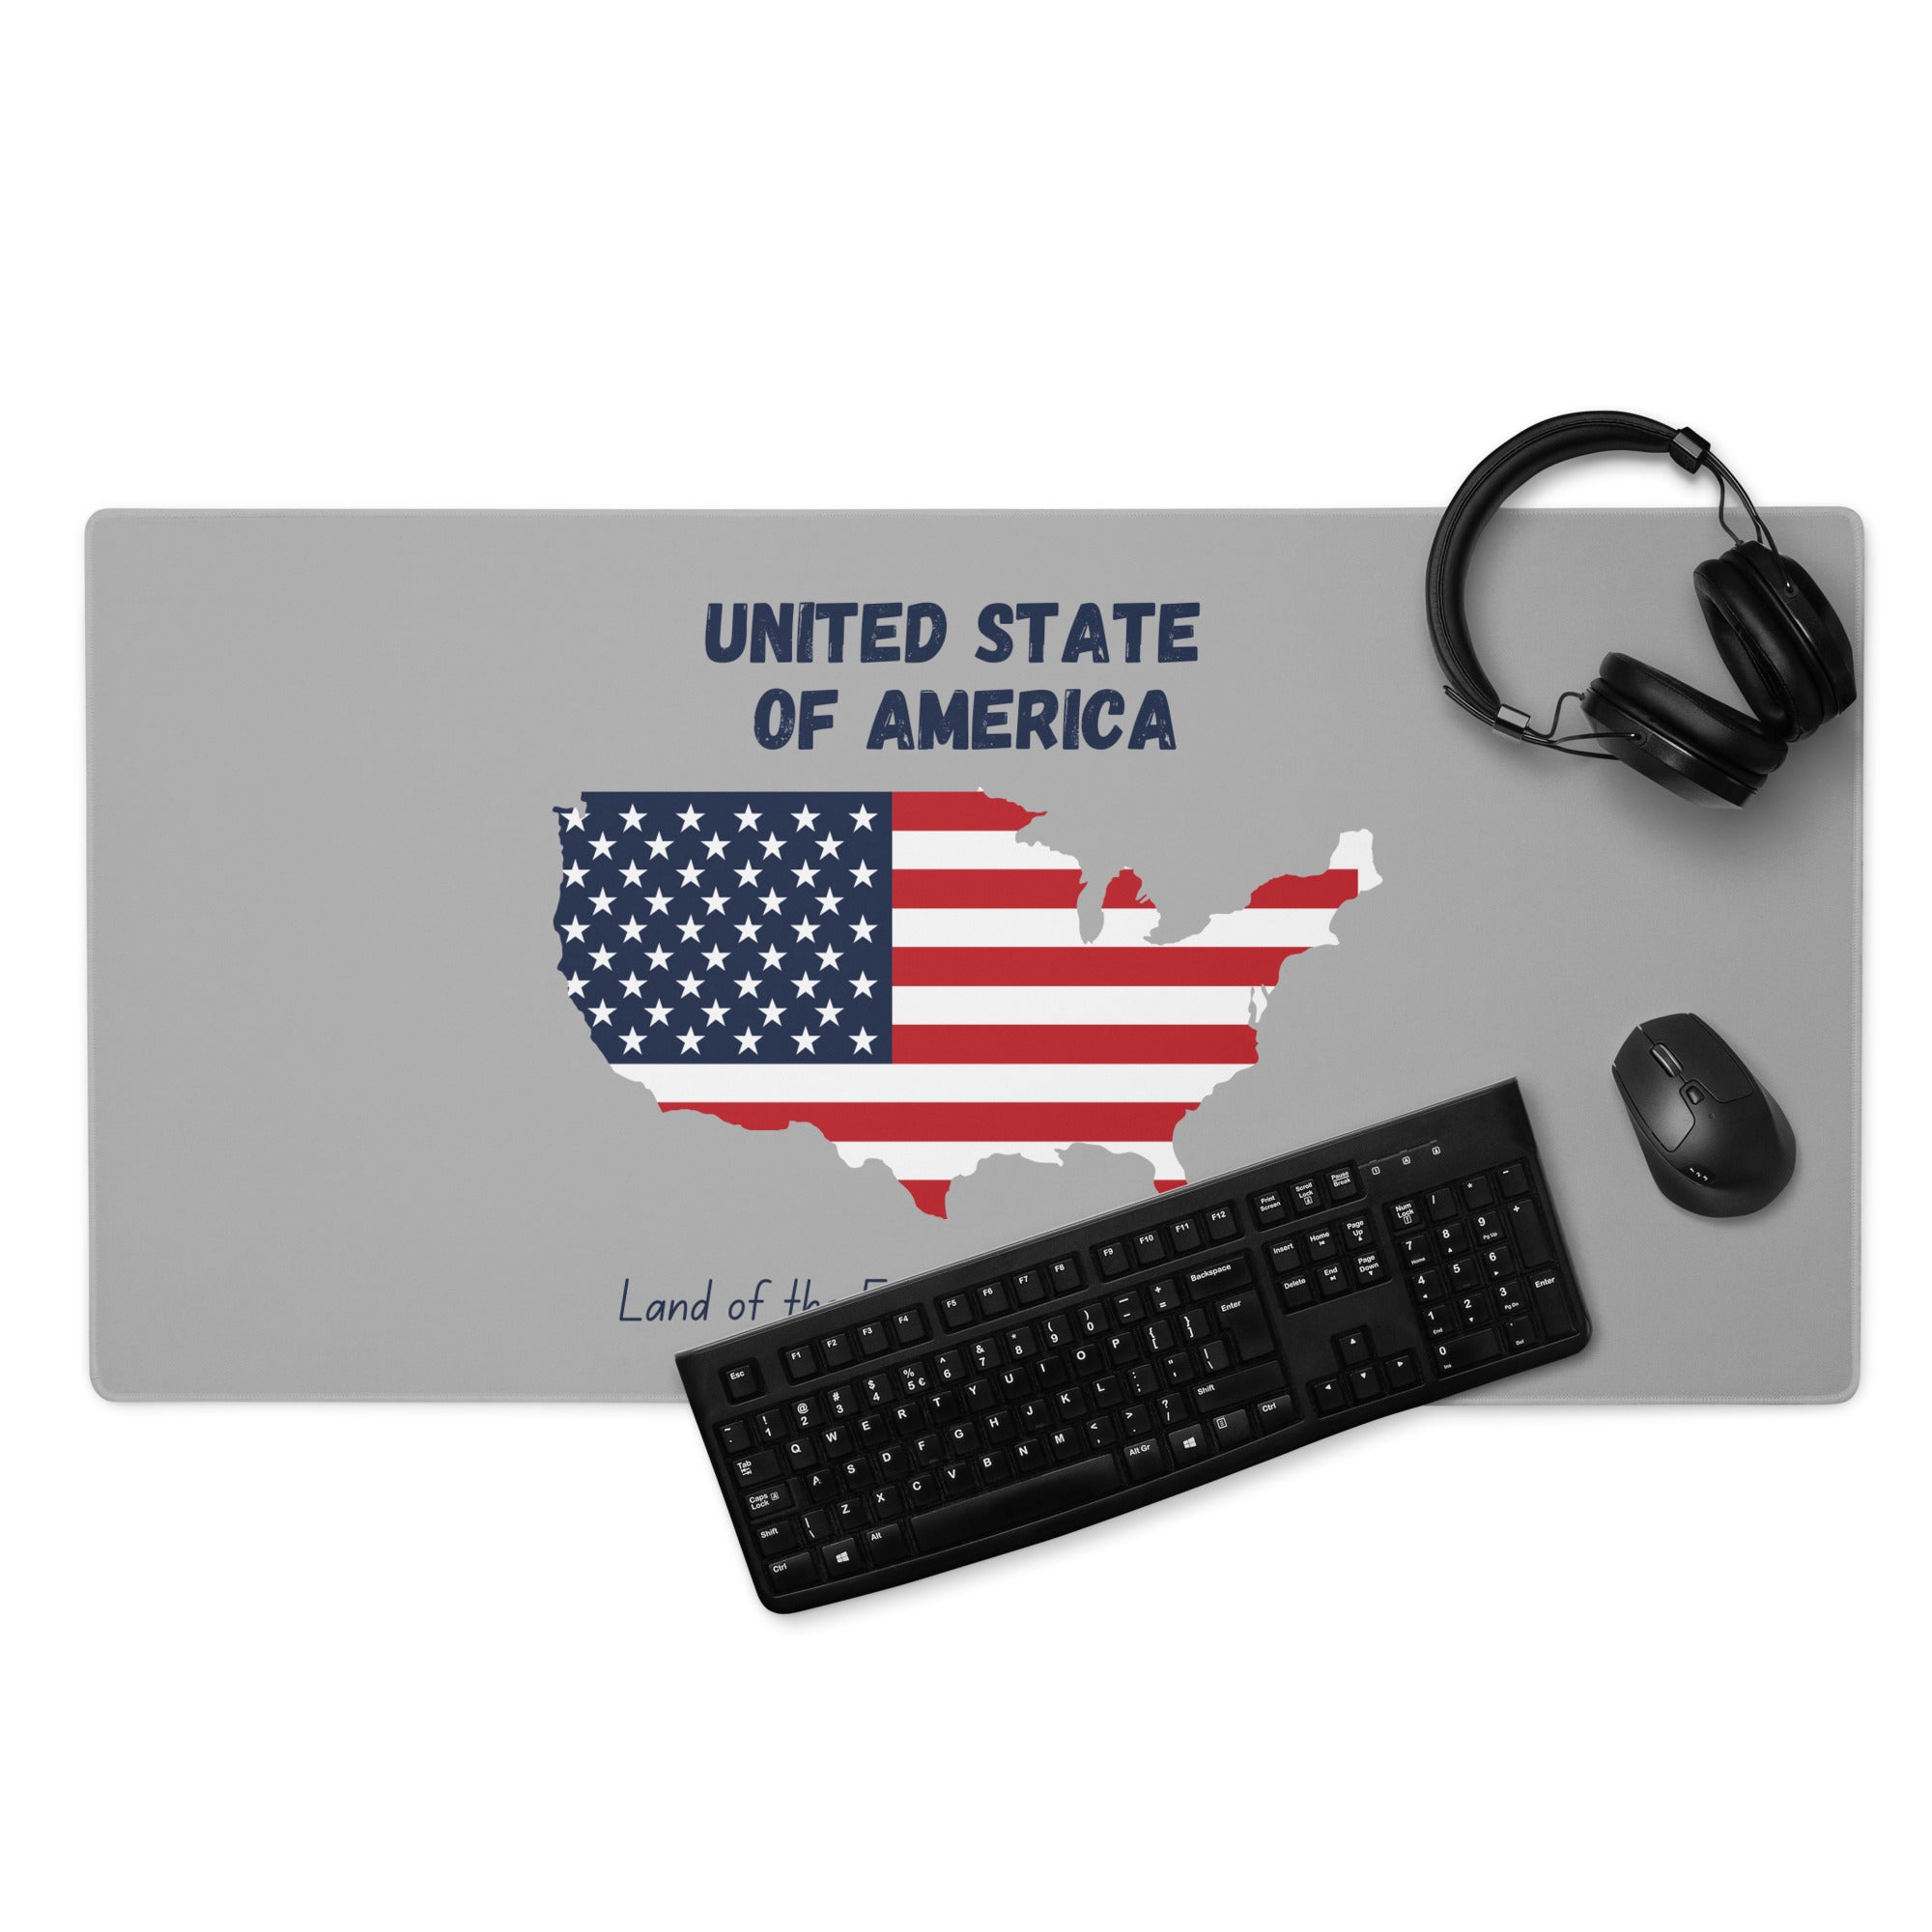 USA Flag Gaming mouse pad Landscape Gaming Mouse Pad with RGB Led, Large Gaming Mouse Pad, Extended Mouse Pad for Gamers